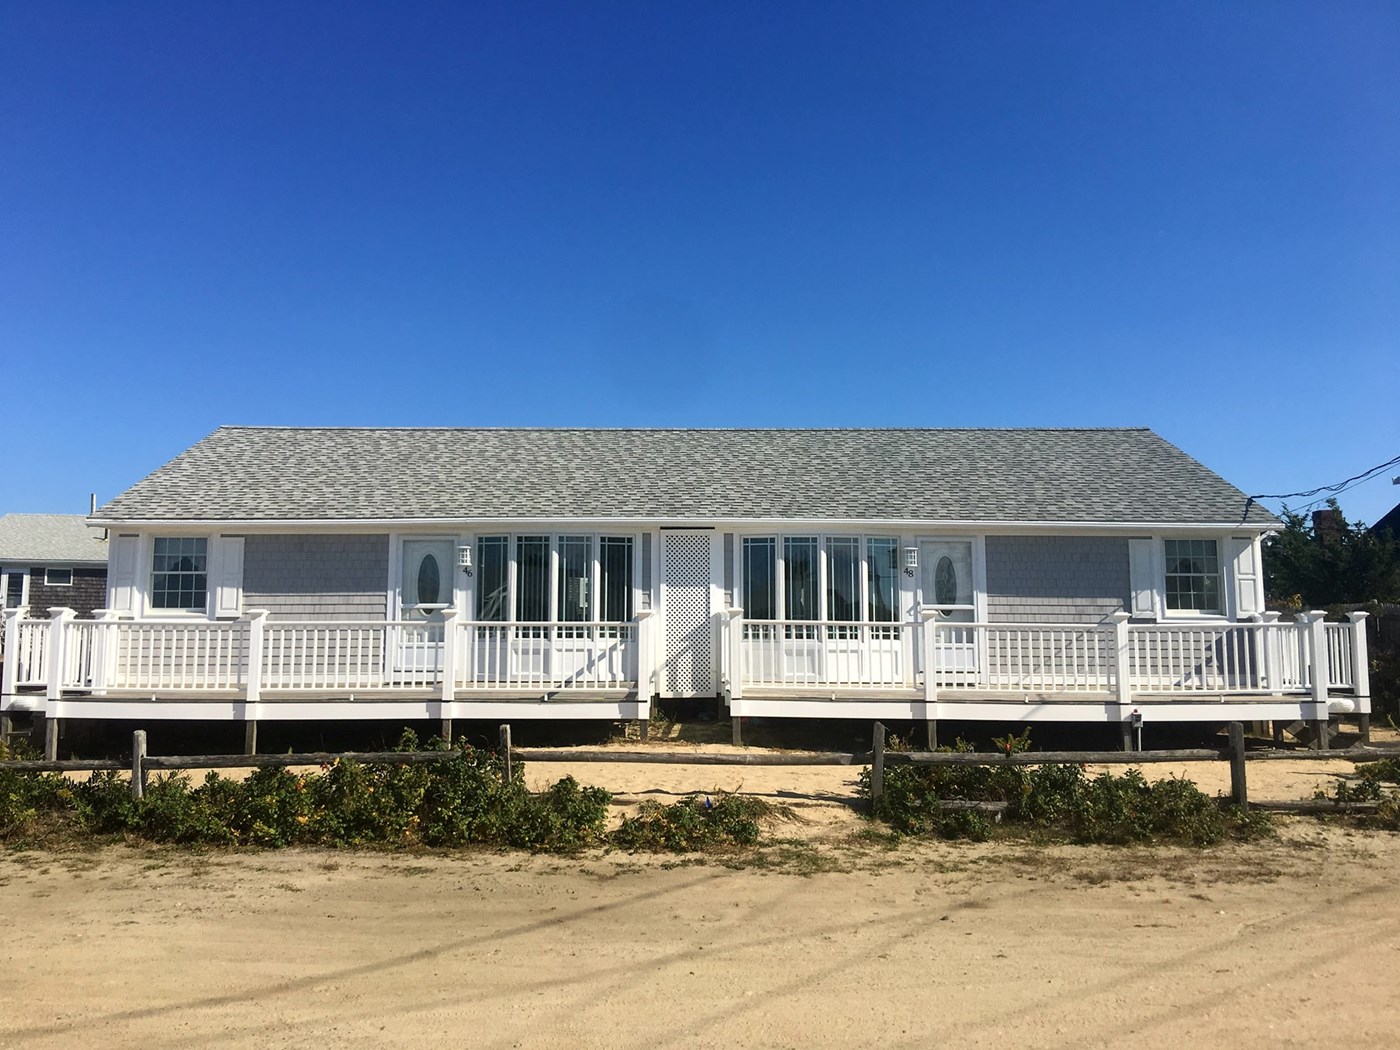 Dennis Vacation Rental Home In Cape Cod Ma Oceanside Cottage Just